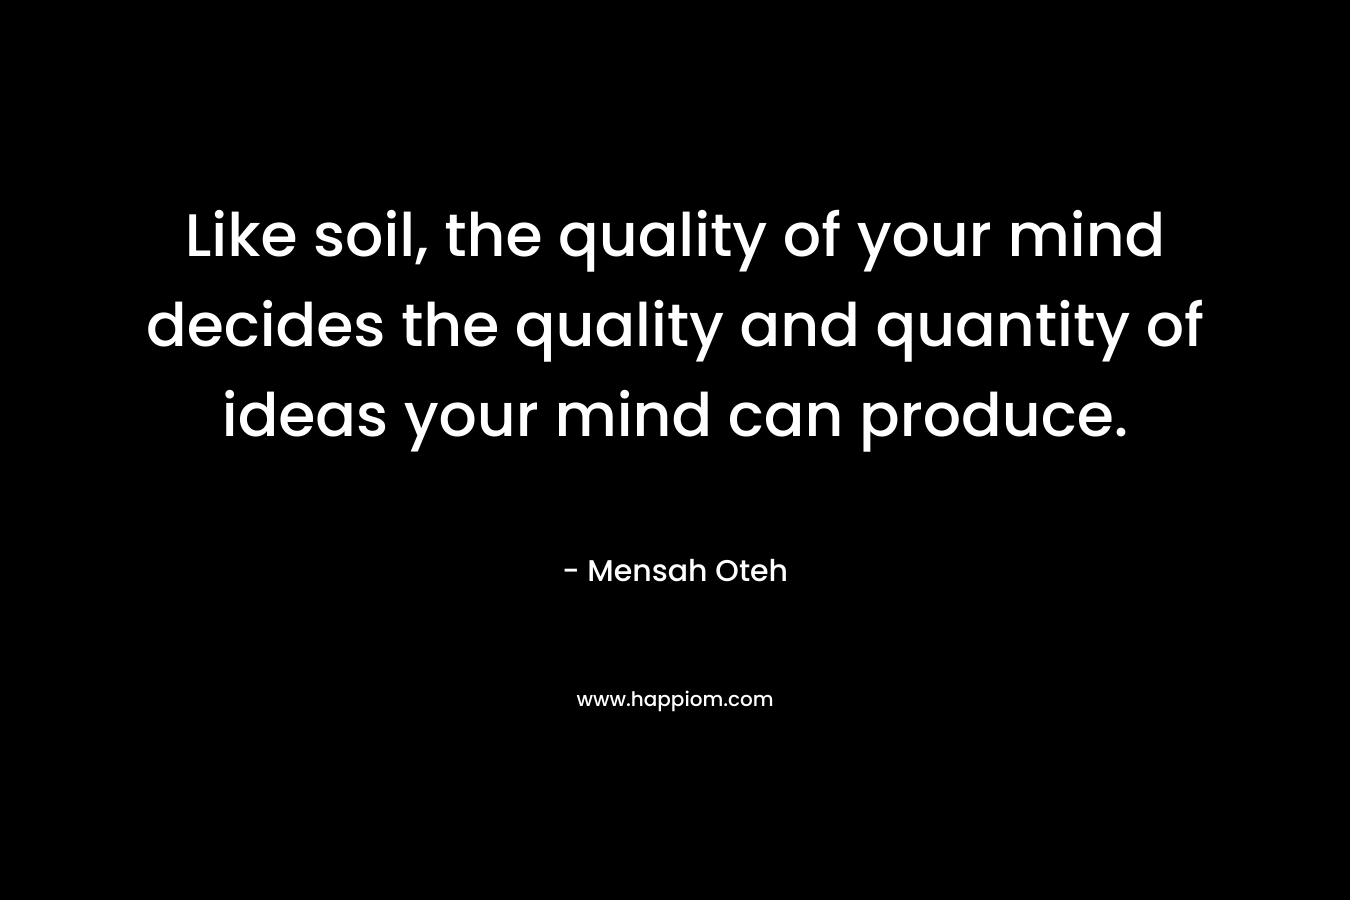 Like soil, the quality of your mind decides the quality and quantity of ideas your mind can produce.